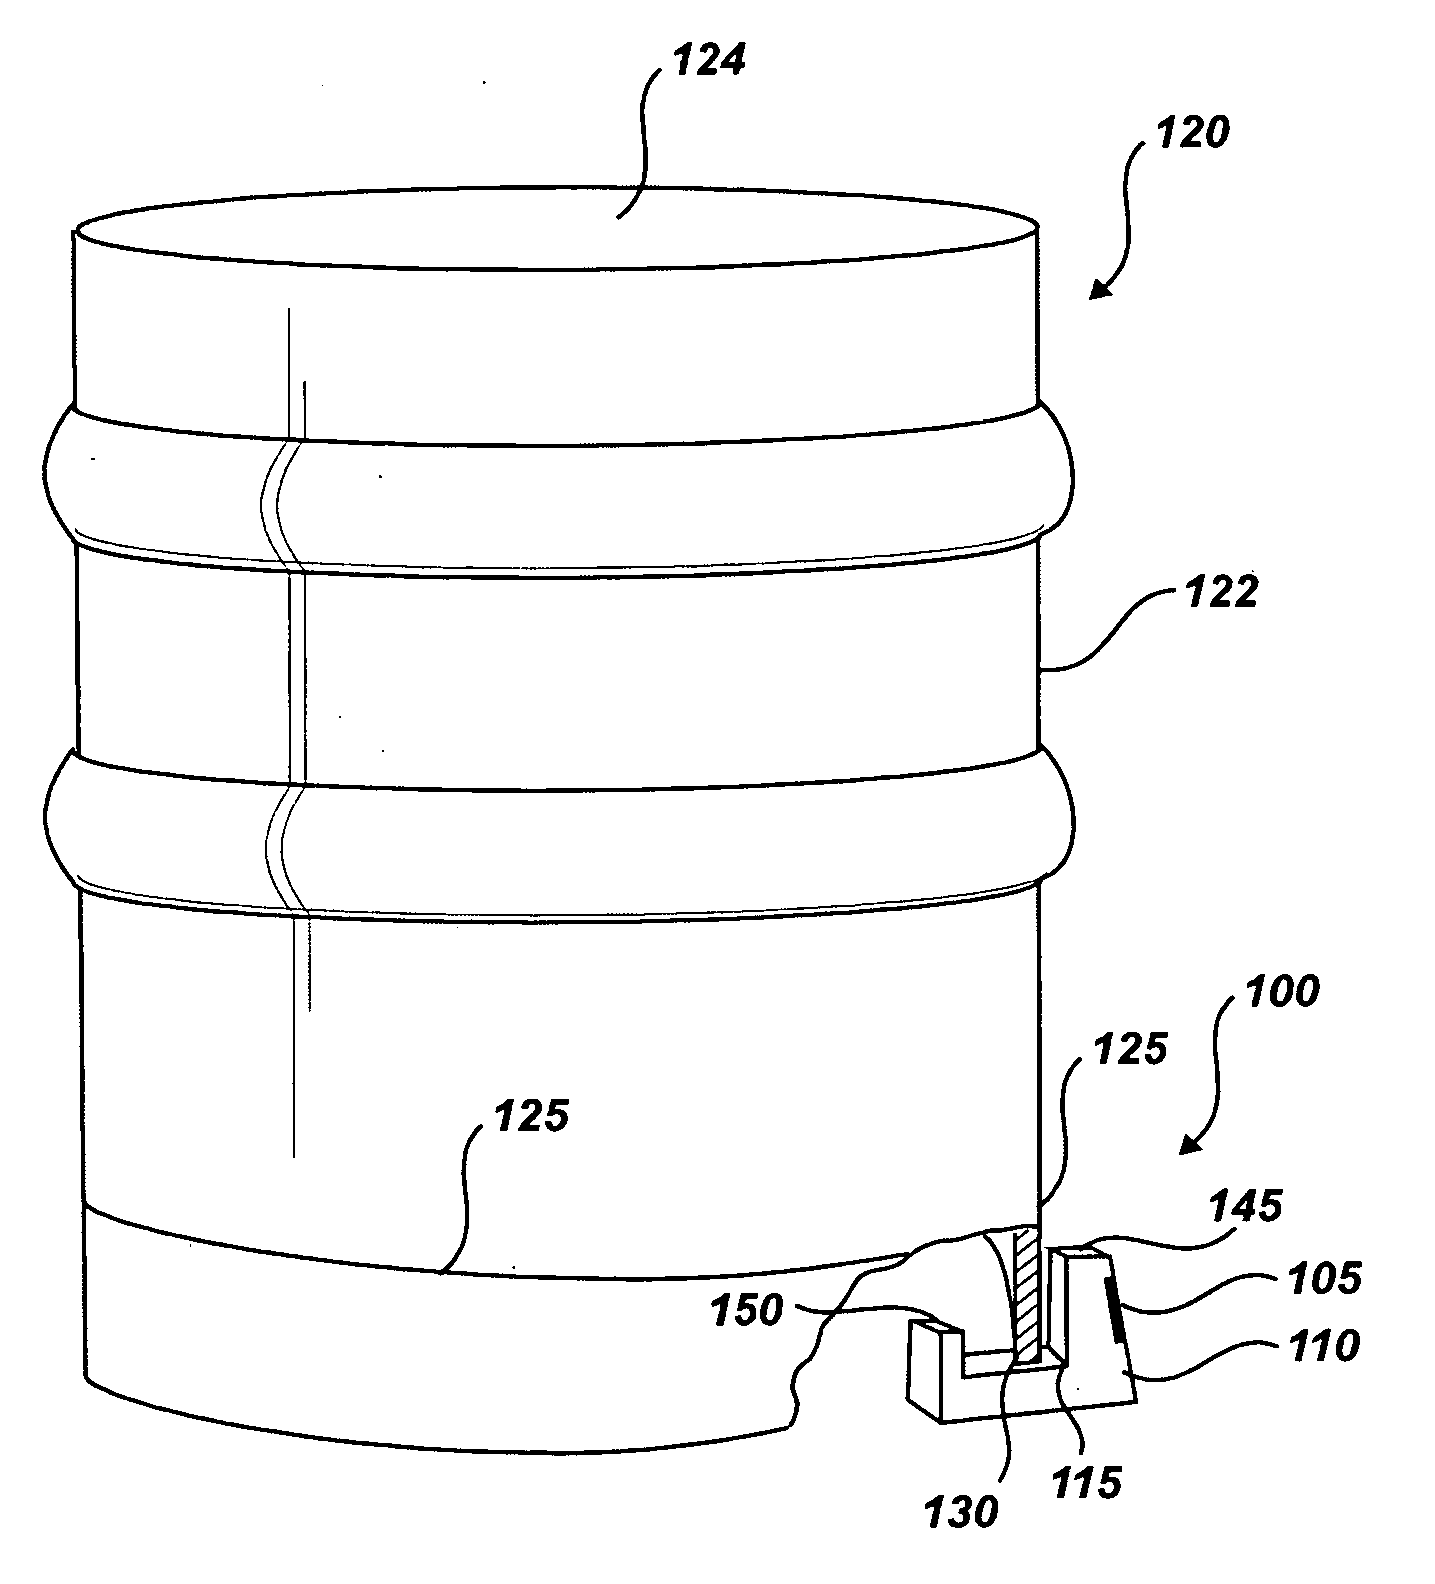 Device for measuring and displaying the amount of beer in a keg